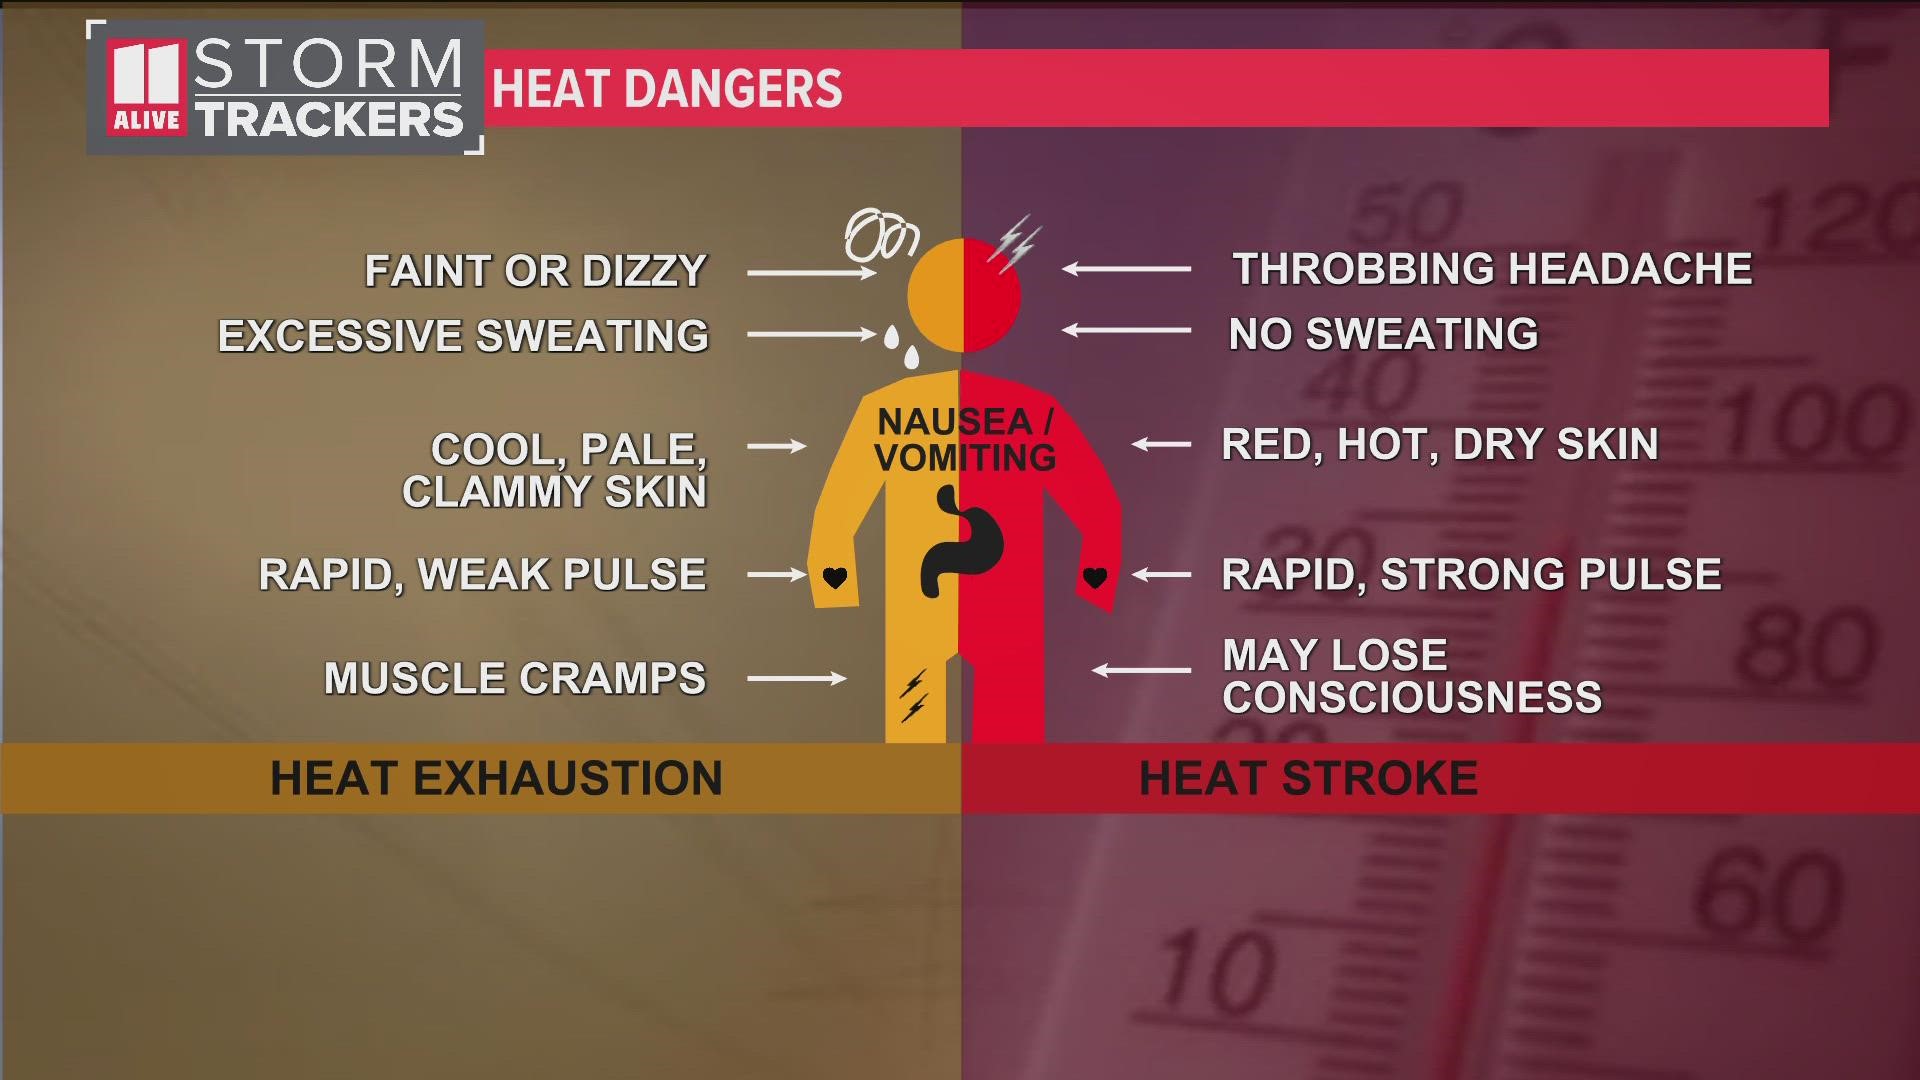 Here's some tips for dealing with hot weather.